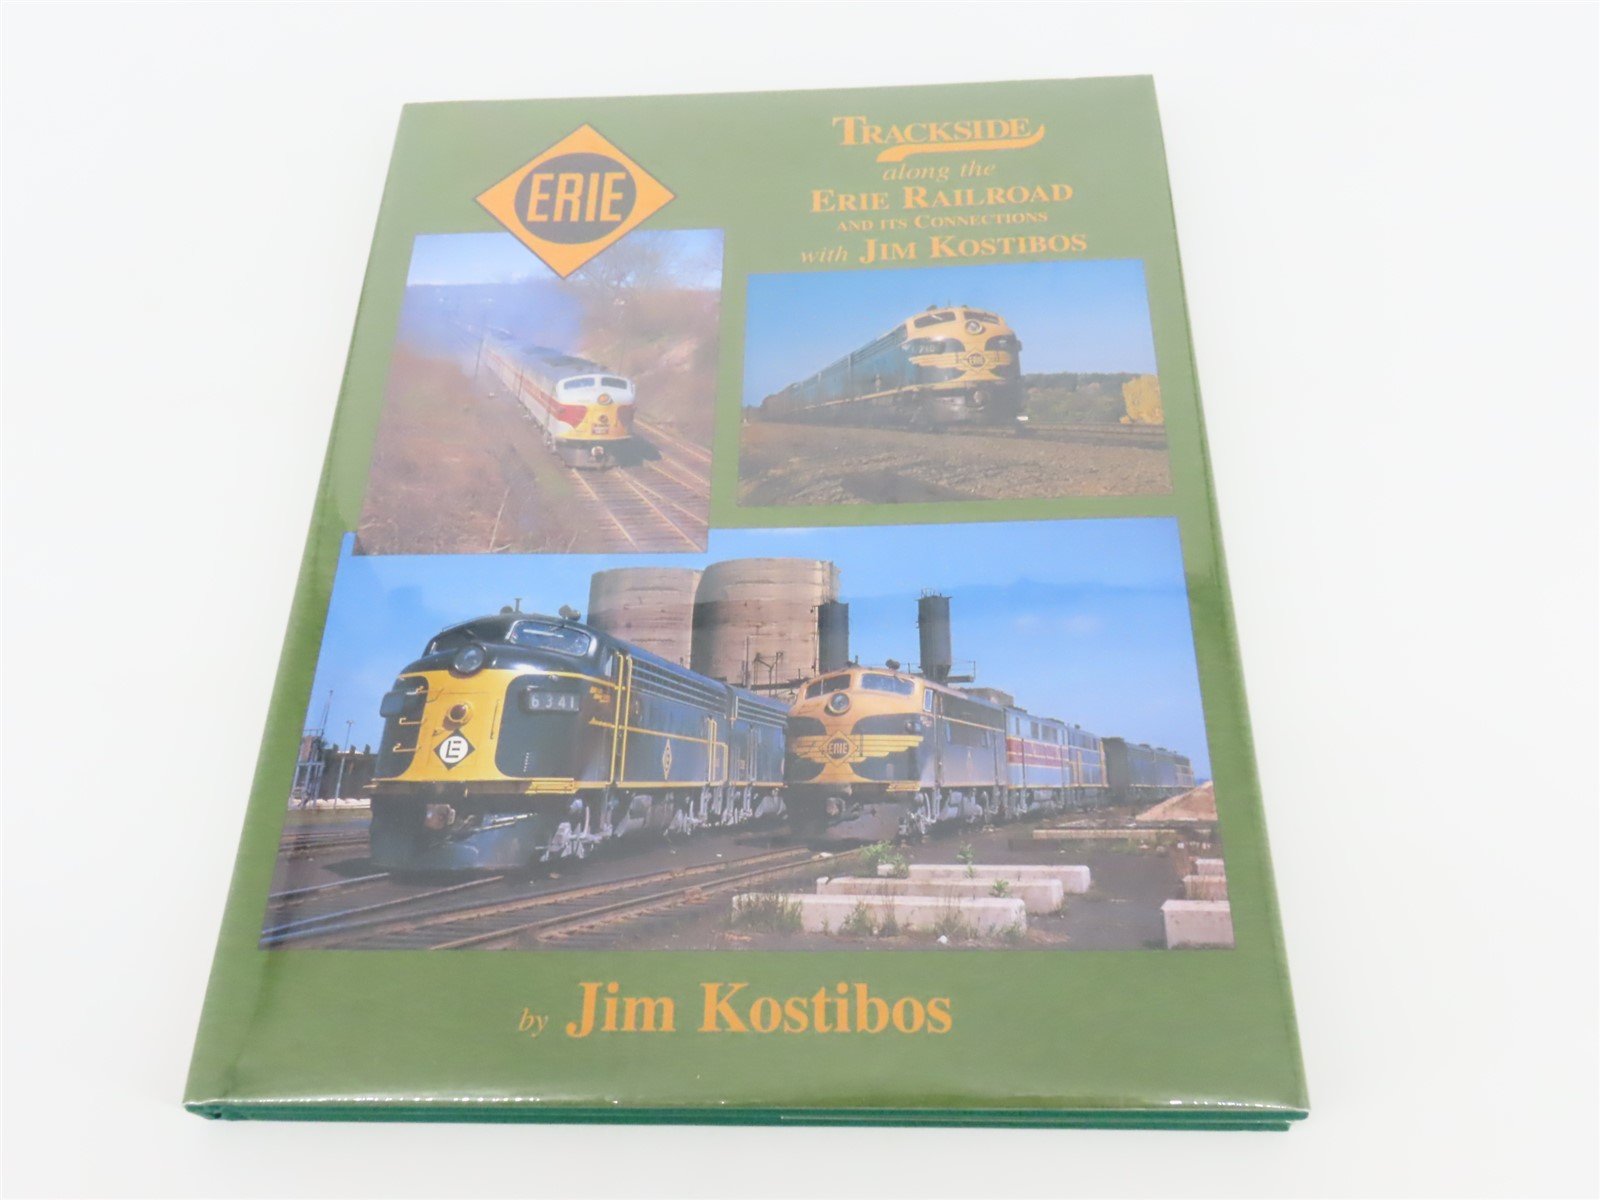 Morning Sun: Trackside Along the Erie Railroad by Jim Kostibos ©2009 HC Book